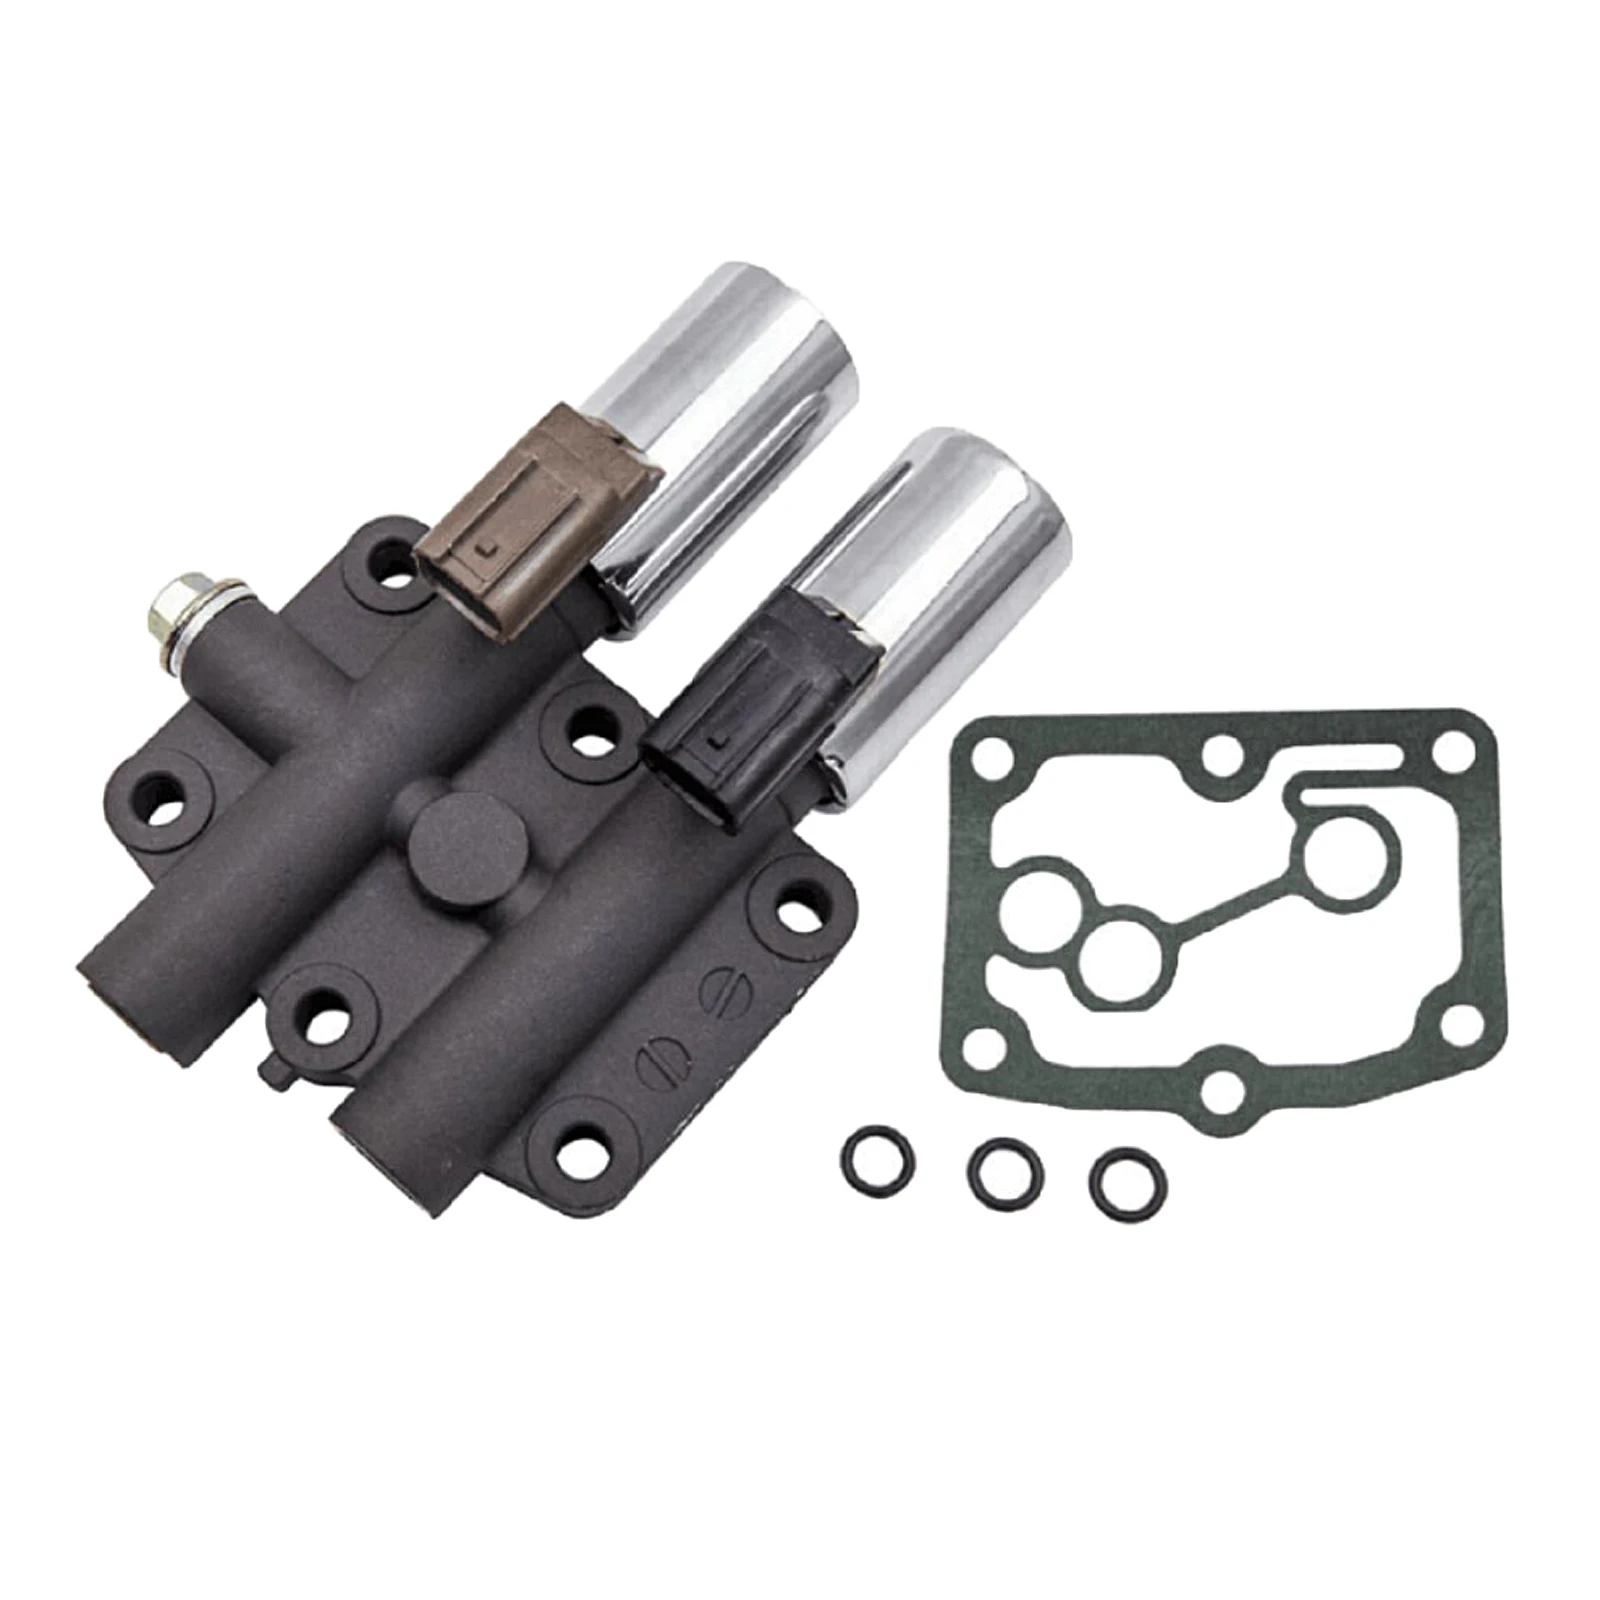 28250RDK014 Transmission Dual Linear Solenoid Replacement for Honda Accord Pilot Ridgeline